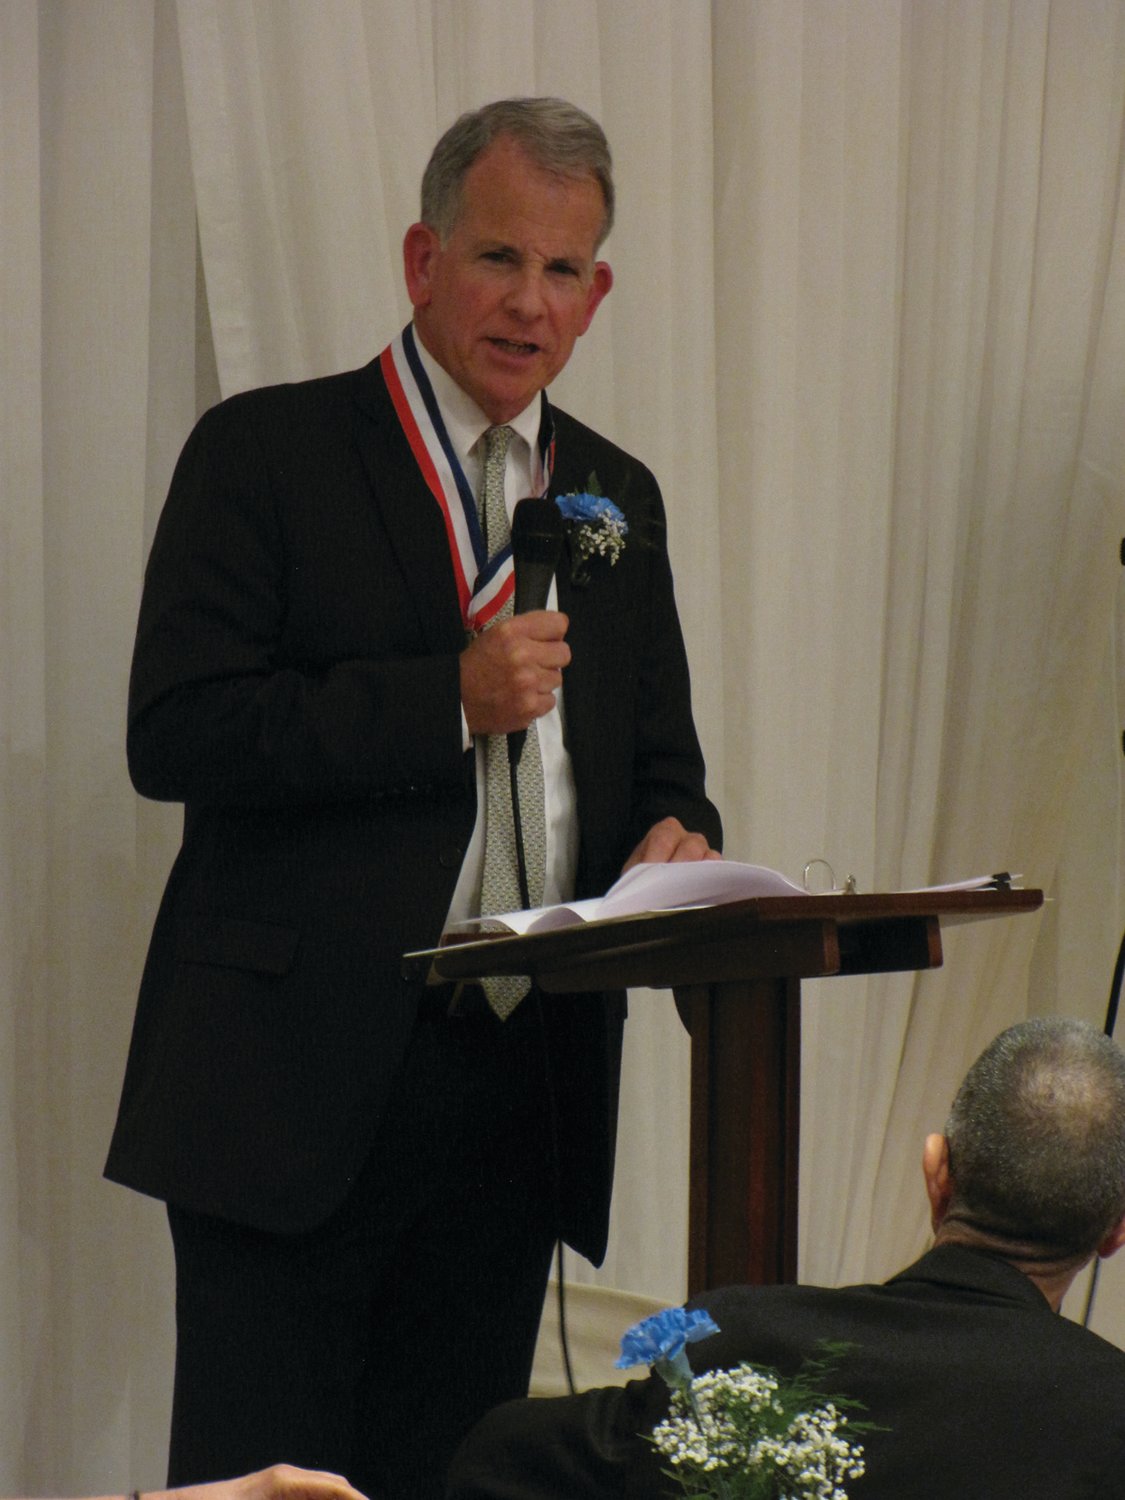 FROM THE JUDGE: Jeffrey Lanphear, an associate justice of the Rhode Island Superior Court, urged those on hand at the Hall of Fame dinner to protect and preserve what makes Cranston a desirable place in which to live.